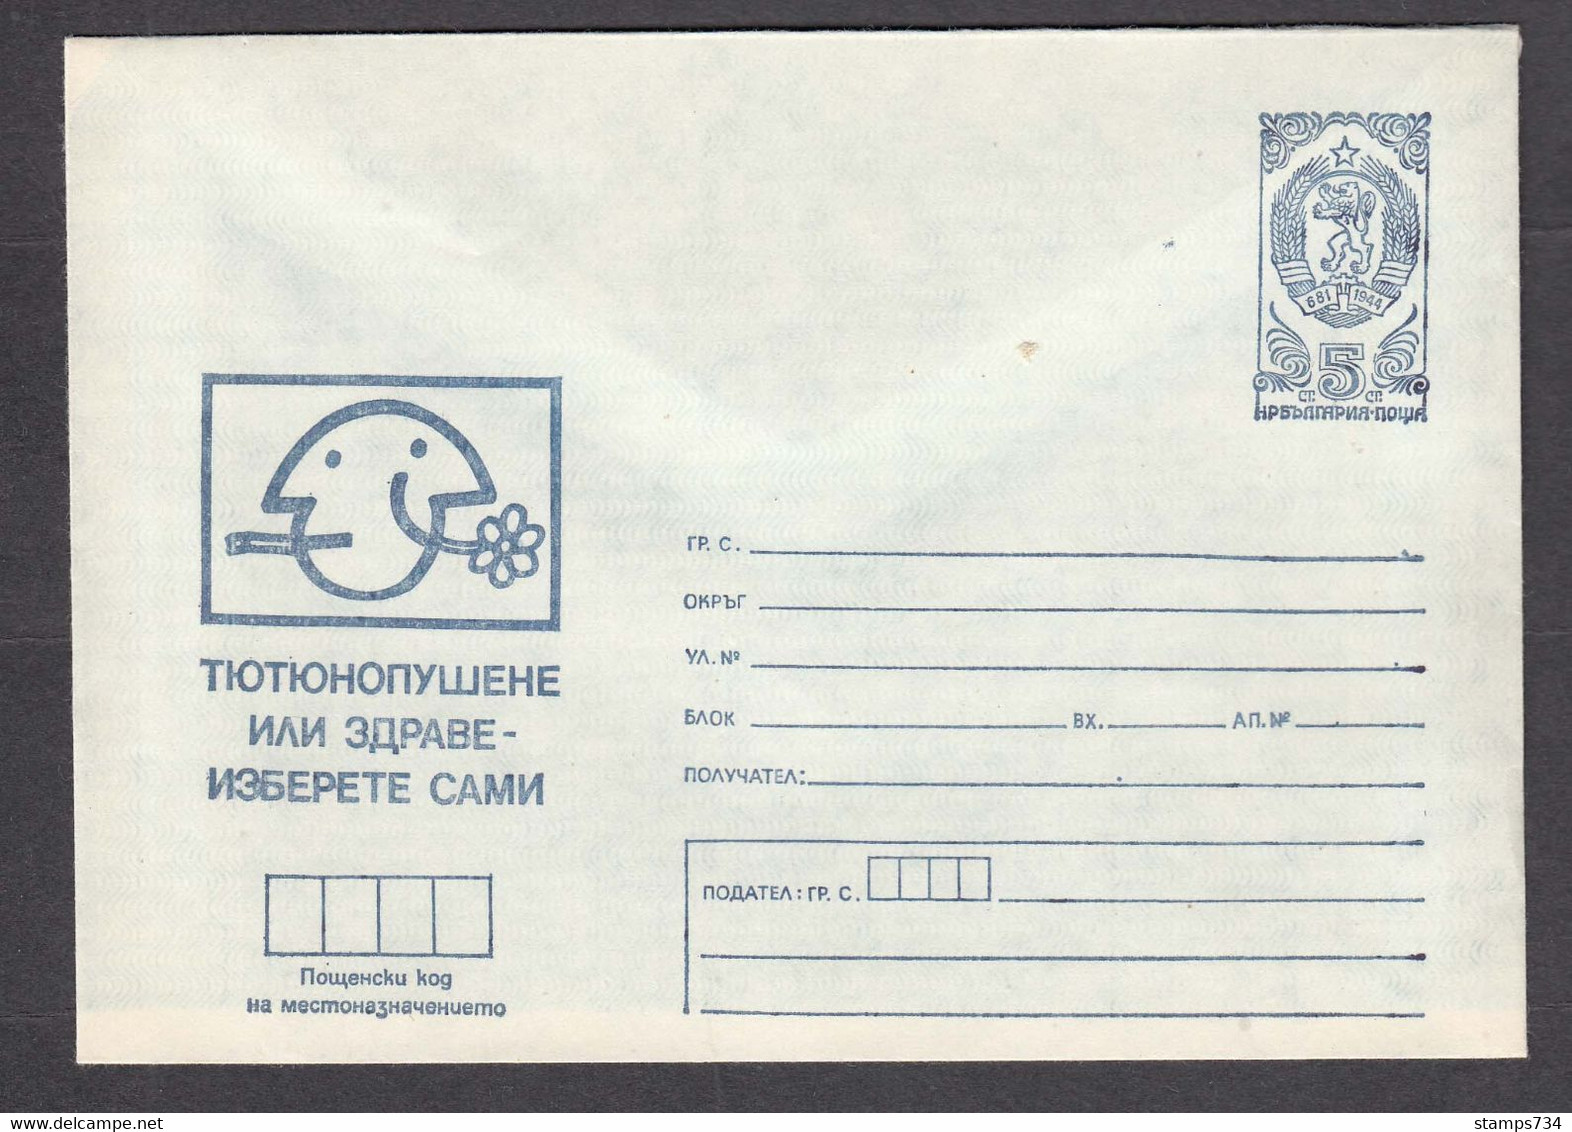 PS 809/1982 - Mint, Smoking Or Health - Choose Your Own, Post.stationery - Bulgaria - Droga